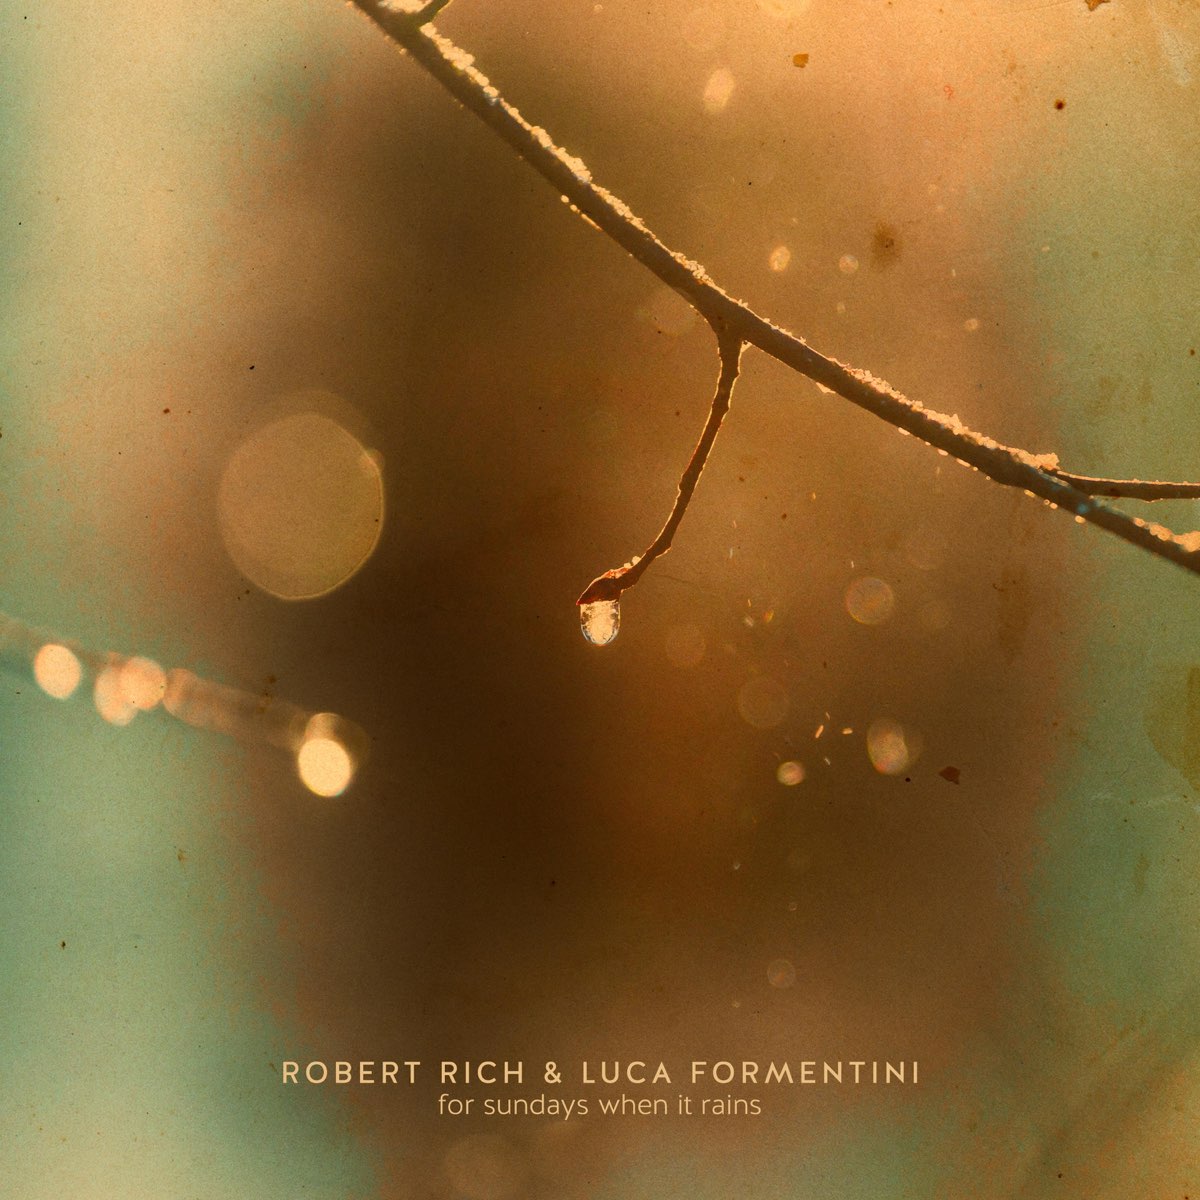 ROBERT RICH & LUCA FORMENTINI: For Sundays When It Rains